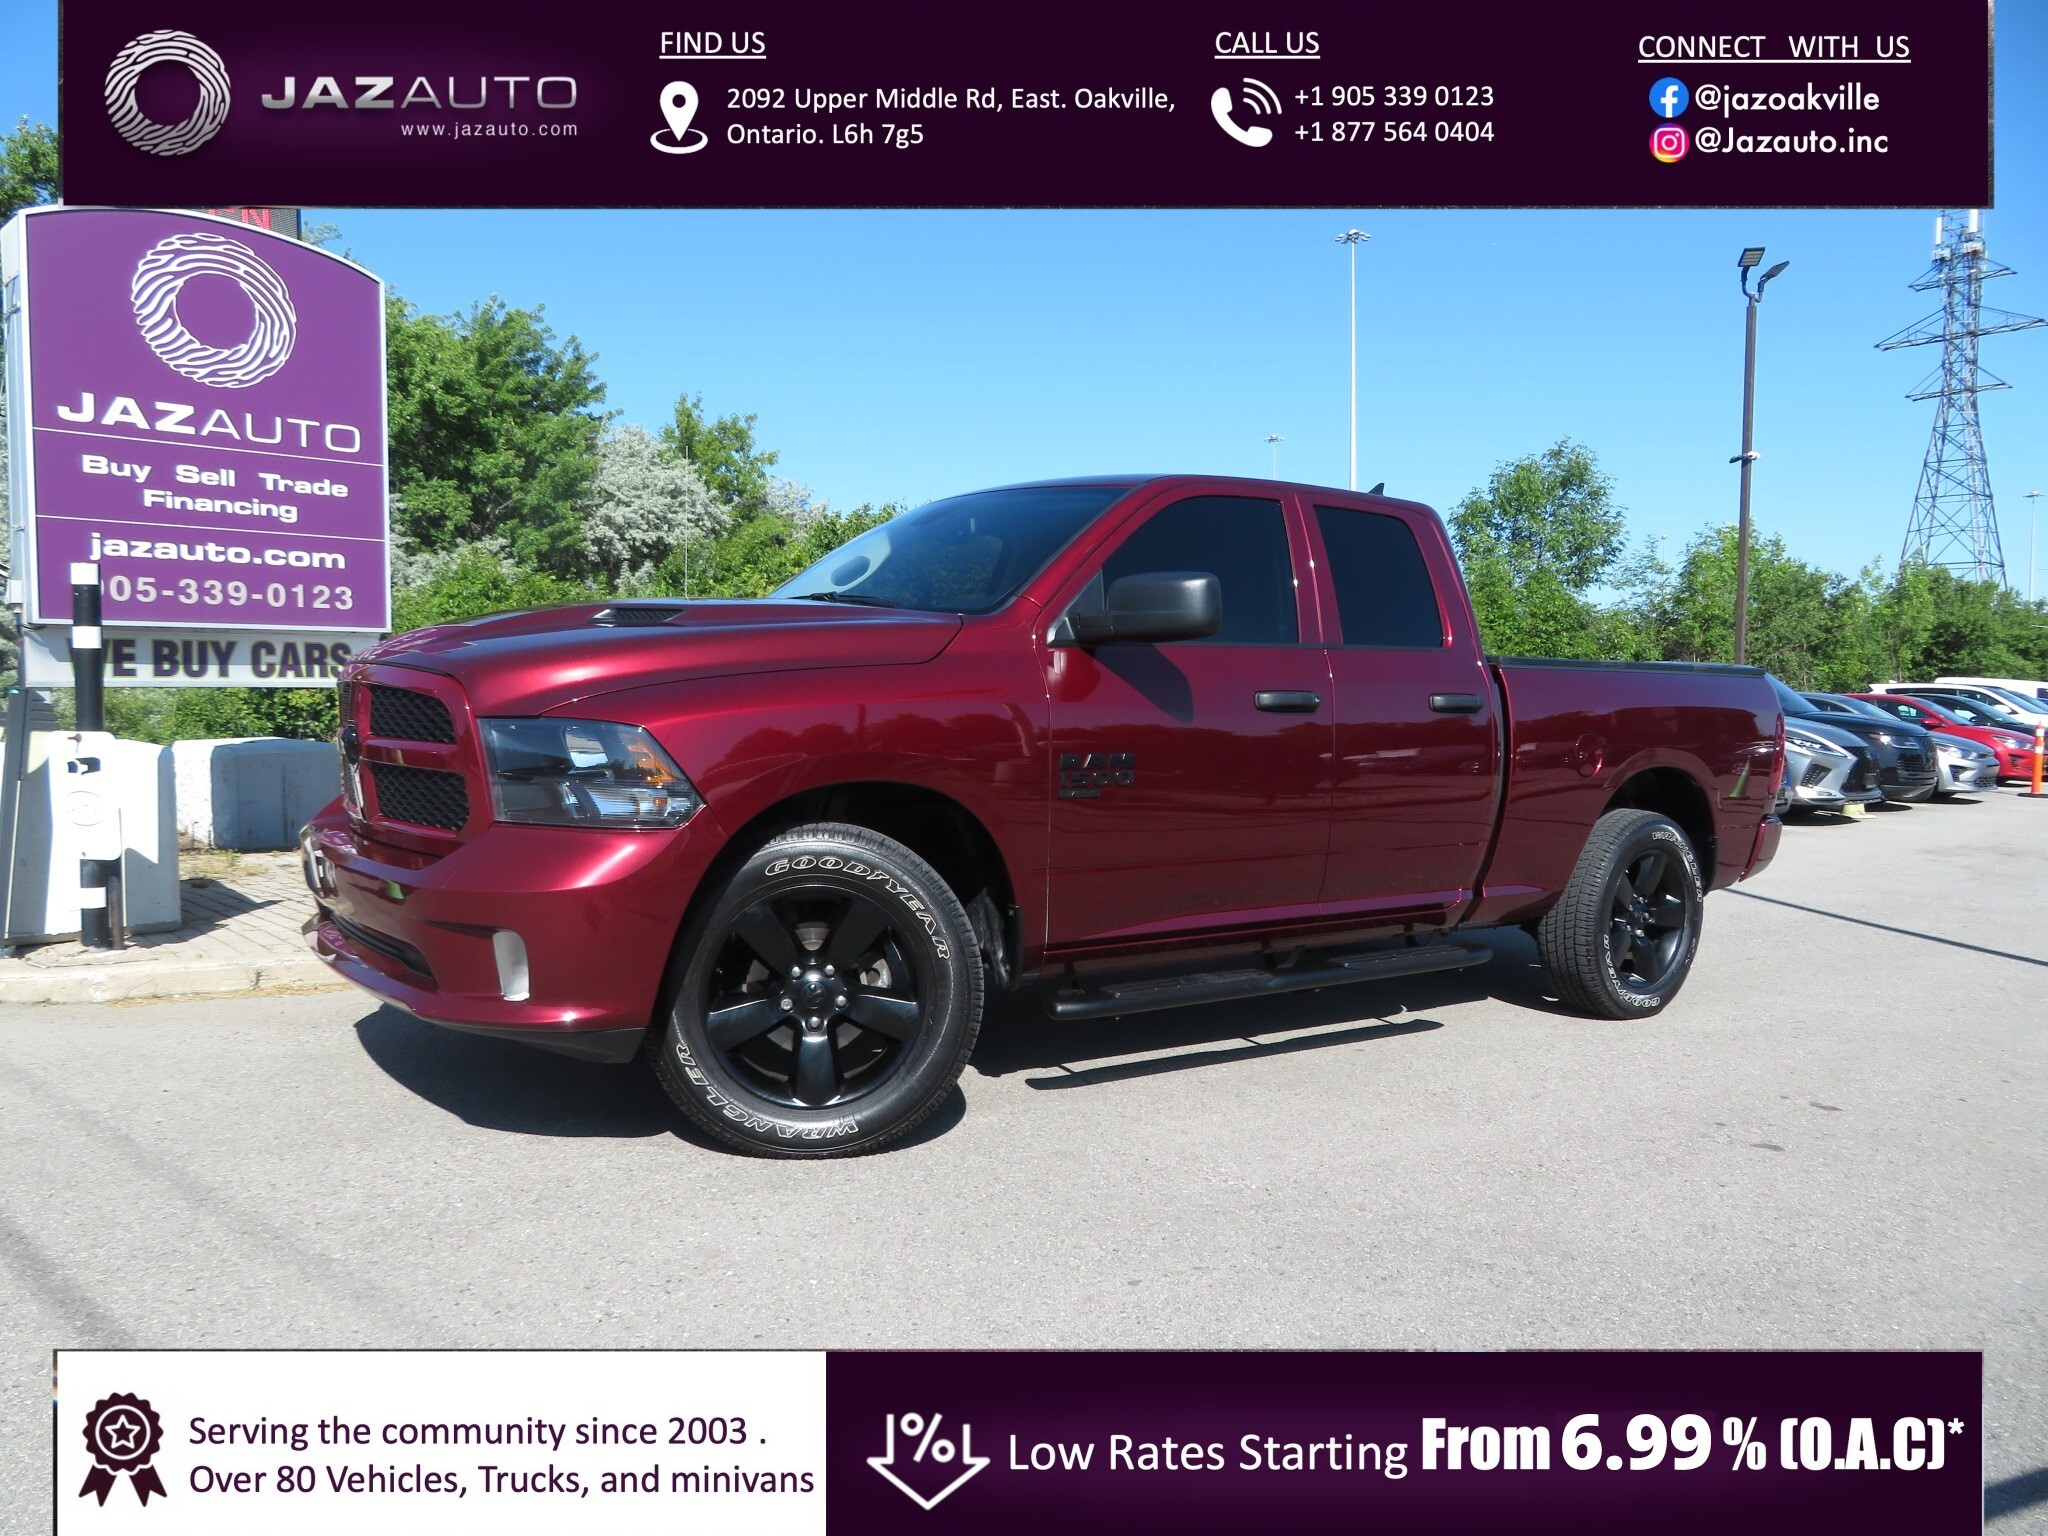 2021 Ram 1500 Classic Quad Cab WITH LONG HORN LEATHER SEATS UPGR